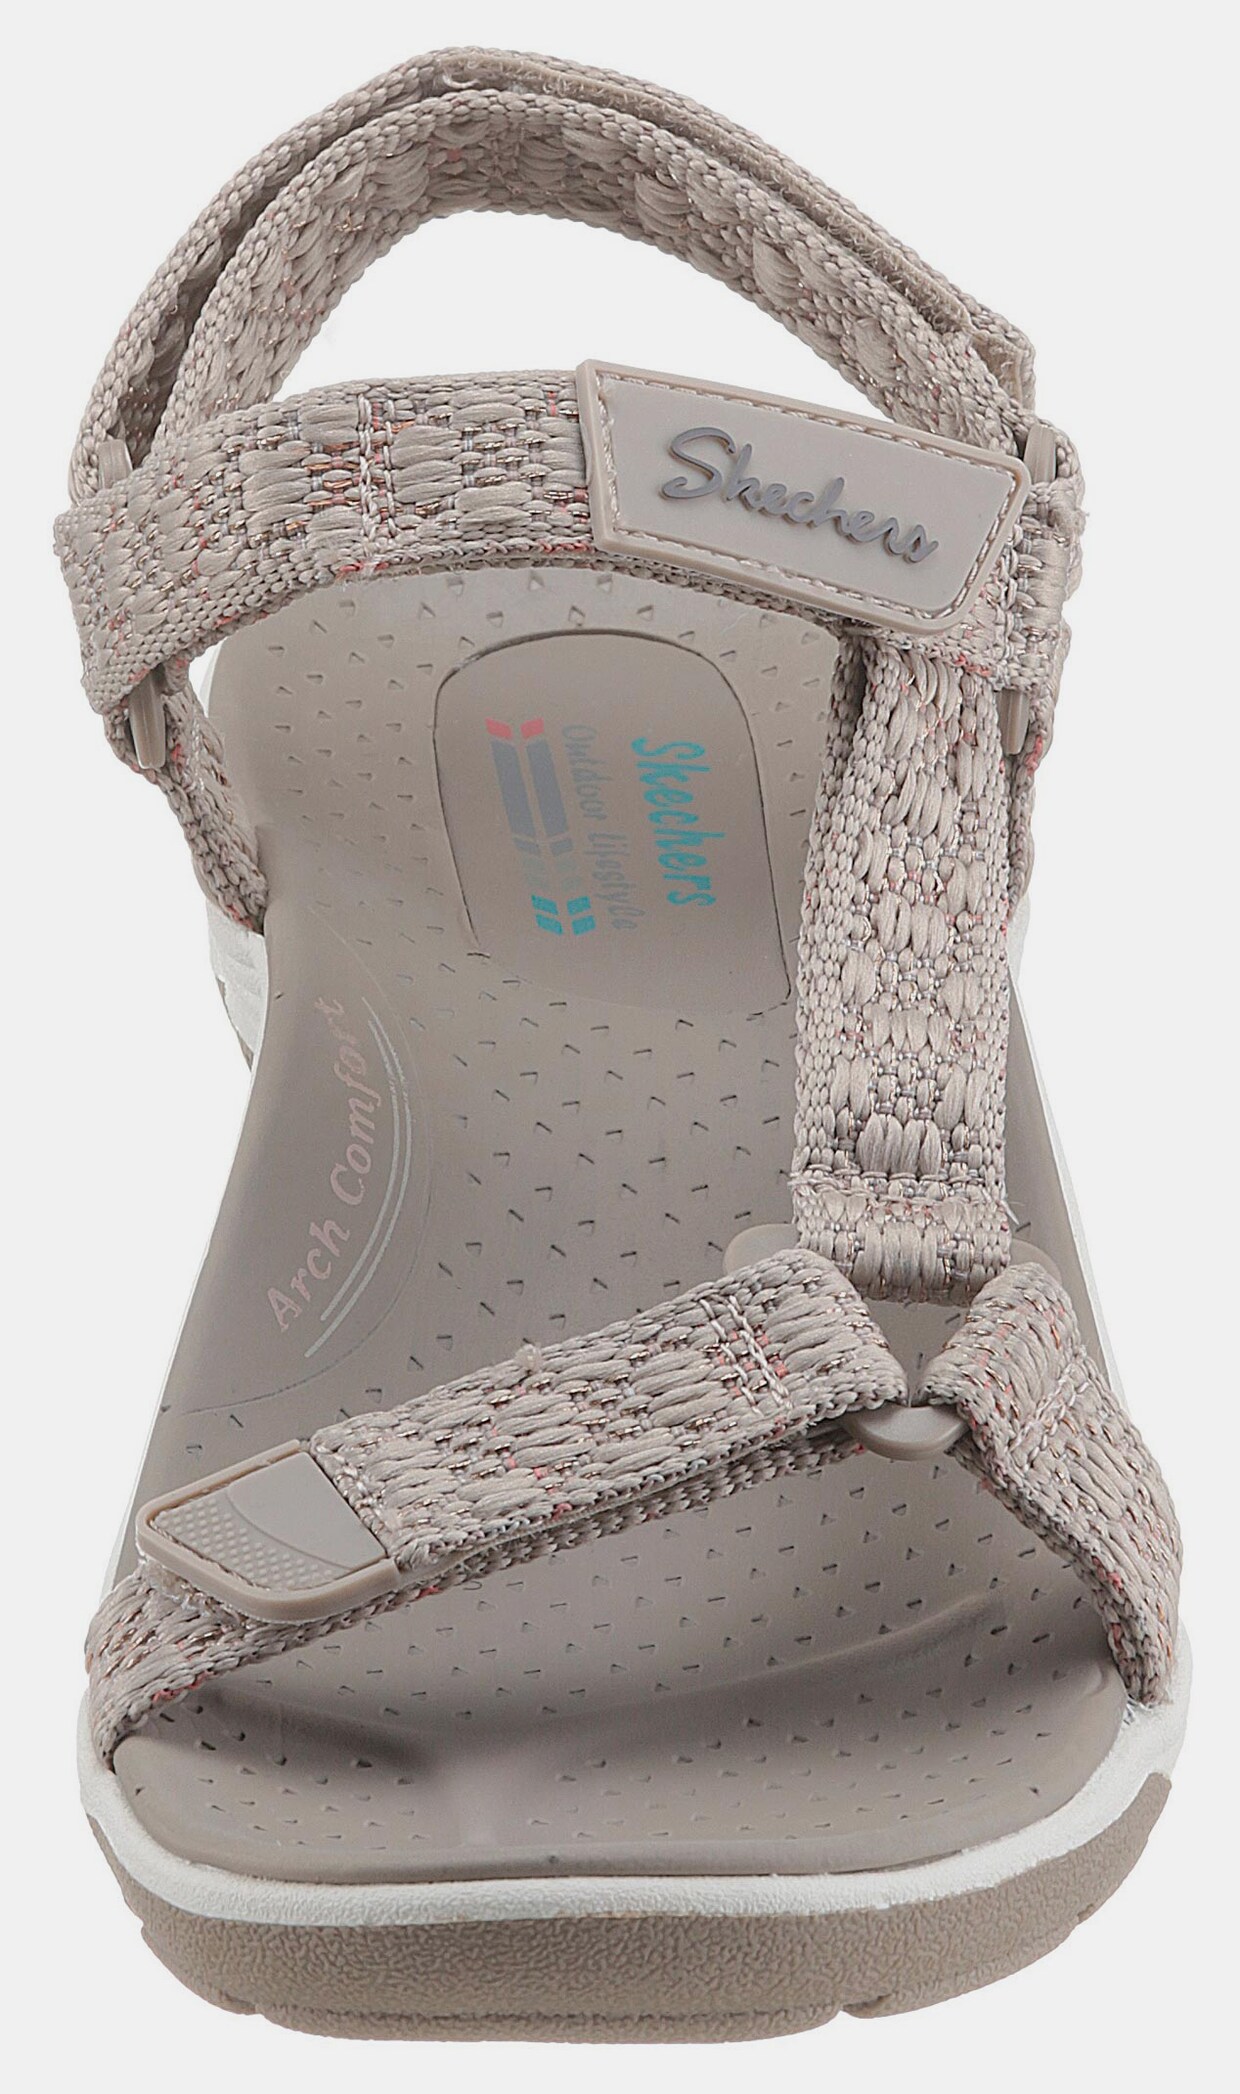 Skechers Outdoorsandale - taupe